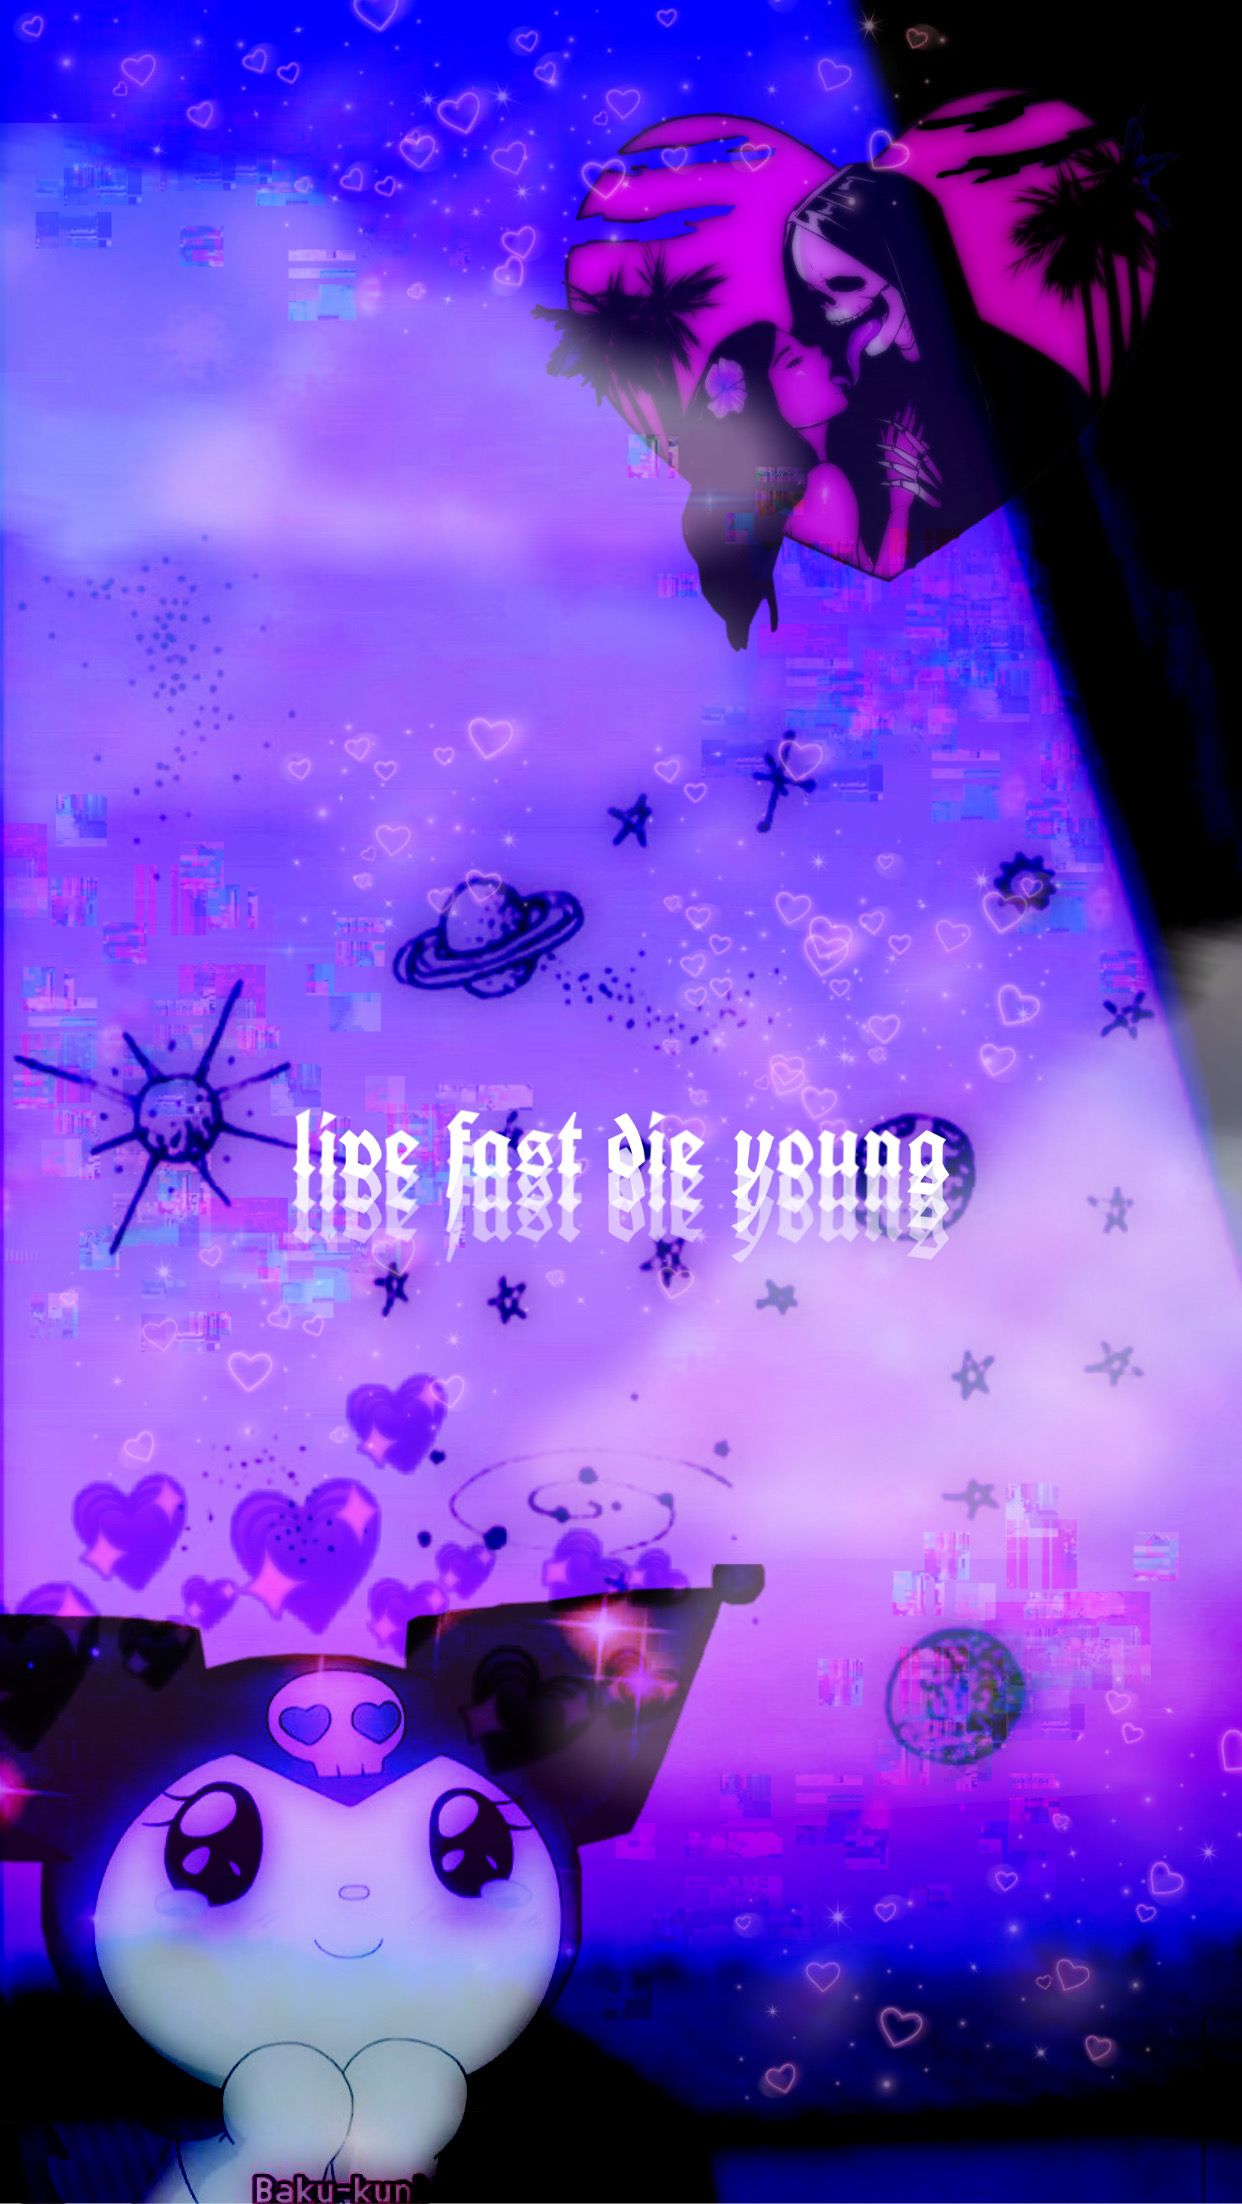 Live fast die young wallpaper made by me! - Kuromi